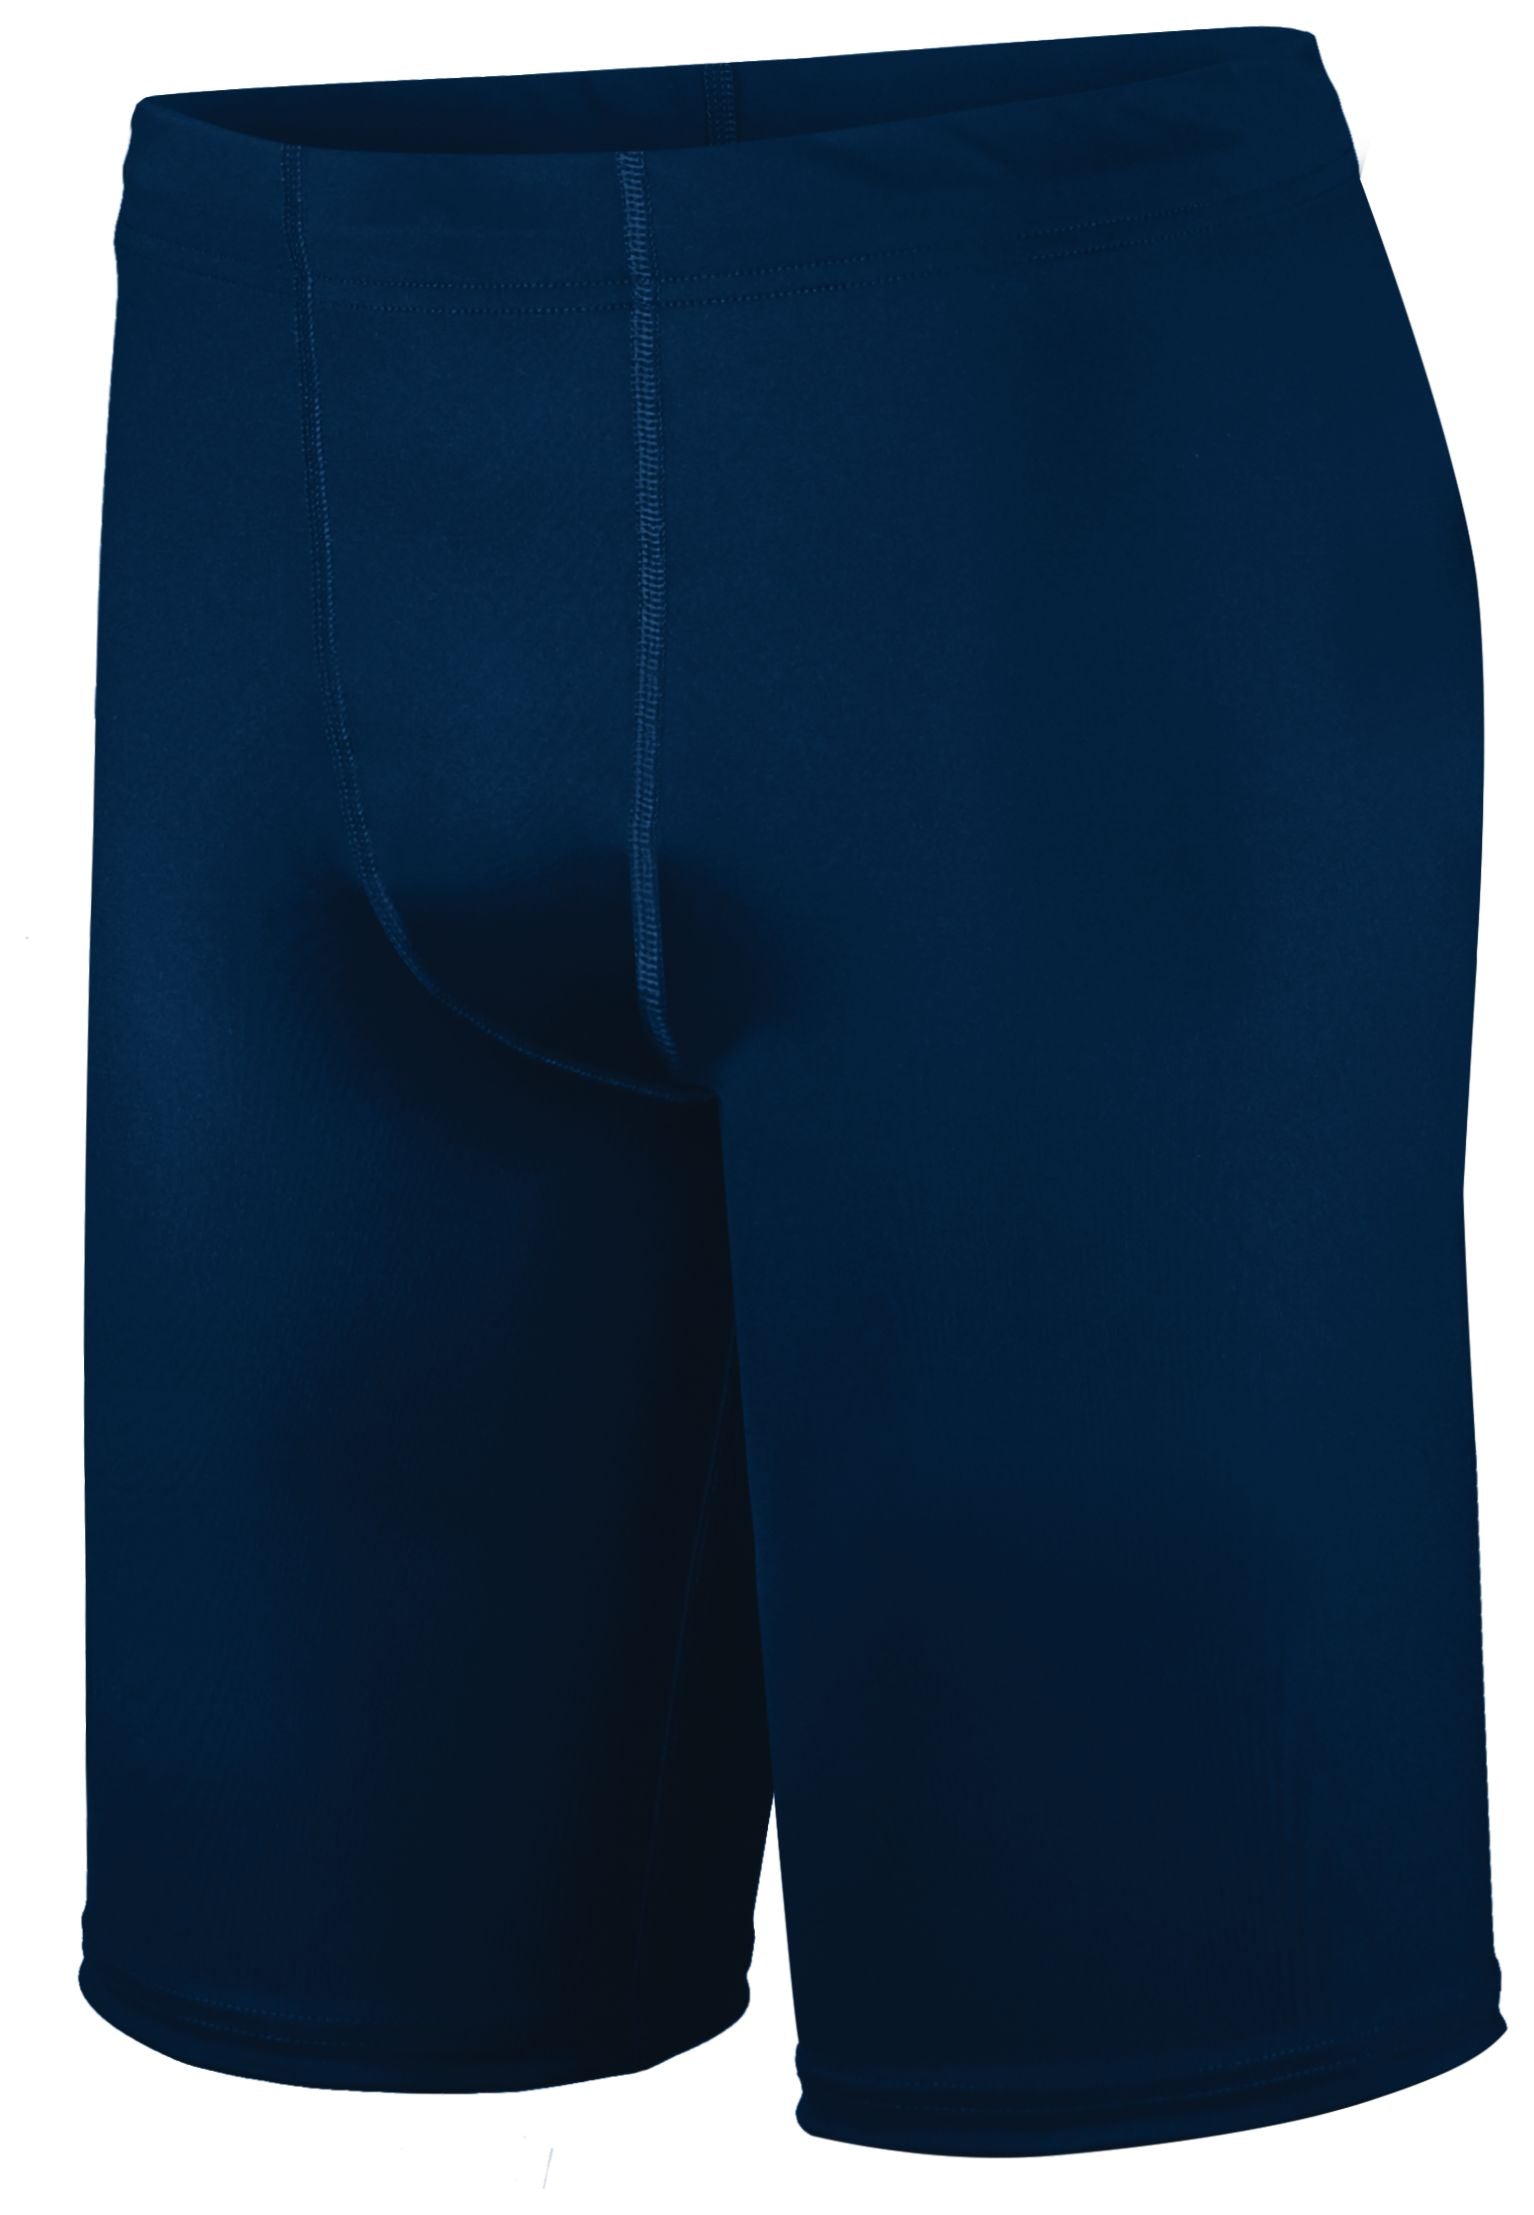 Holloway Pr Max Compression Shorts in Navy  -Part of the Adult, Adult-Shorts, Track-Field, Holloway product lines at KanaleyCreations.com